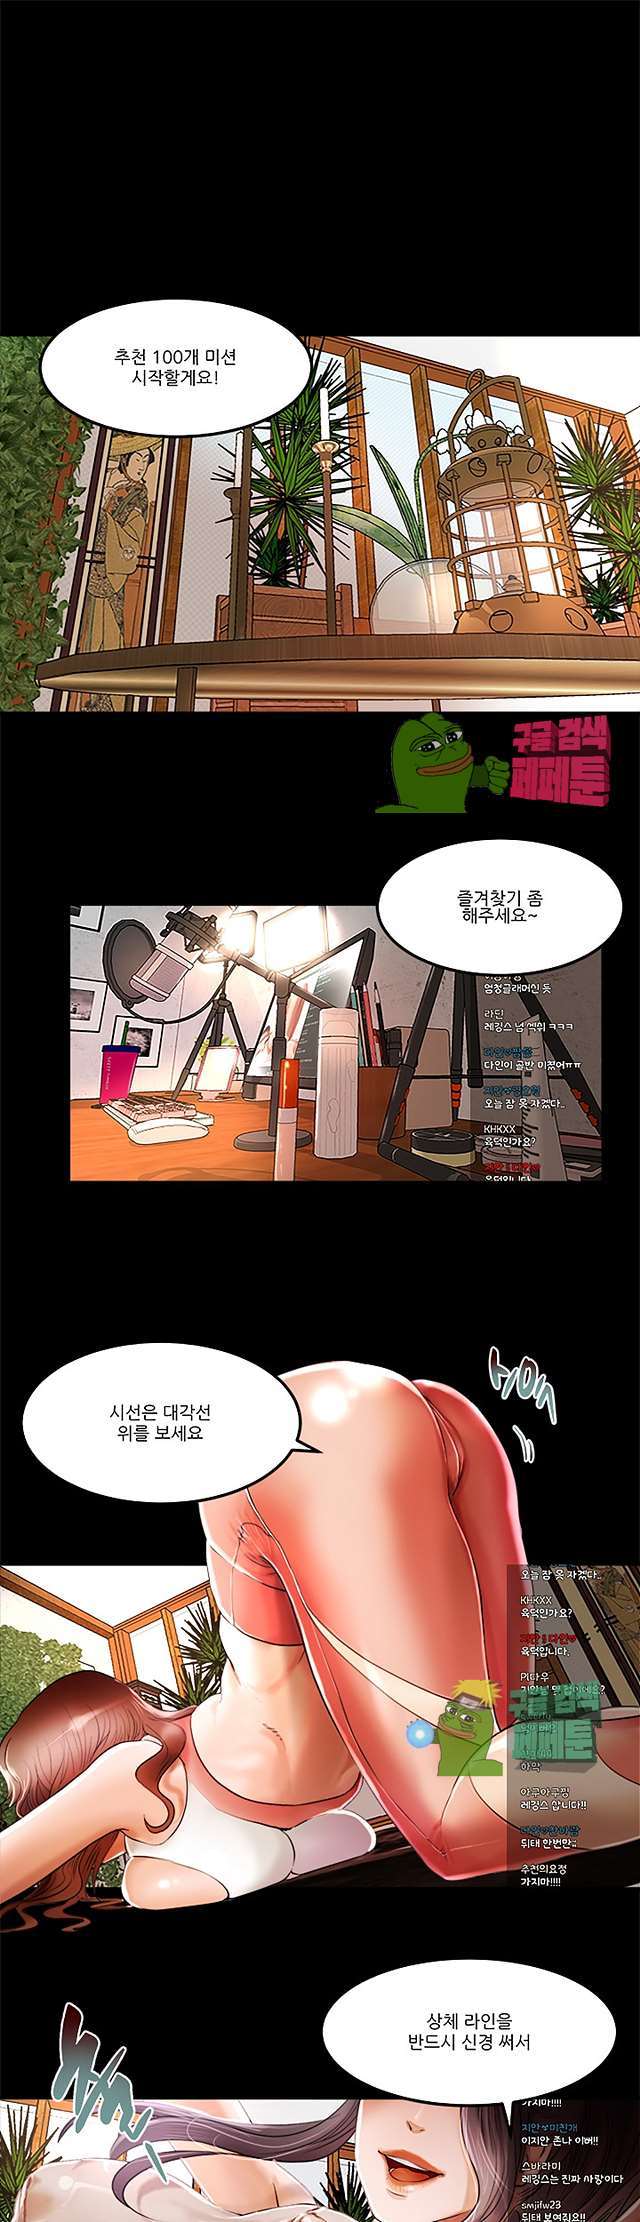 Starballoon Raw - Chapter 1